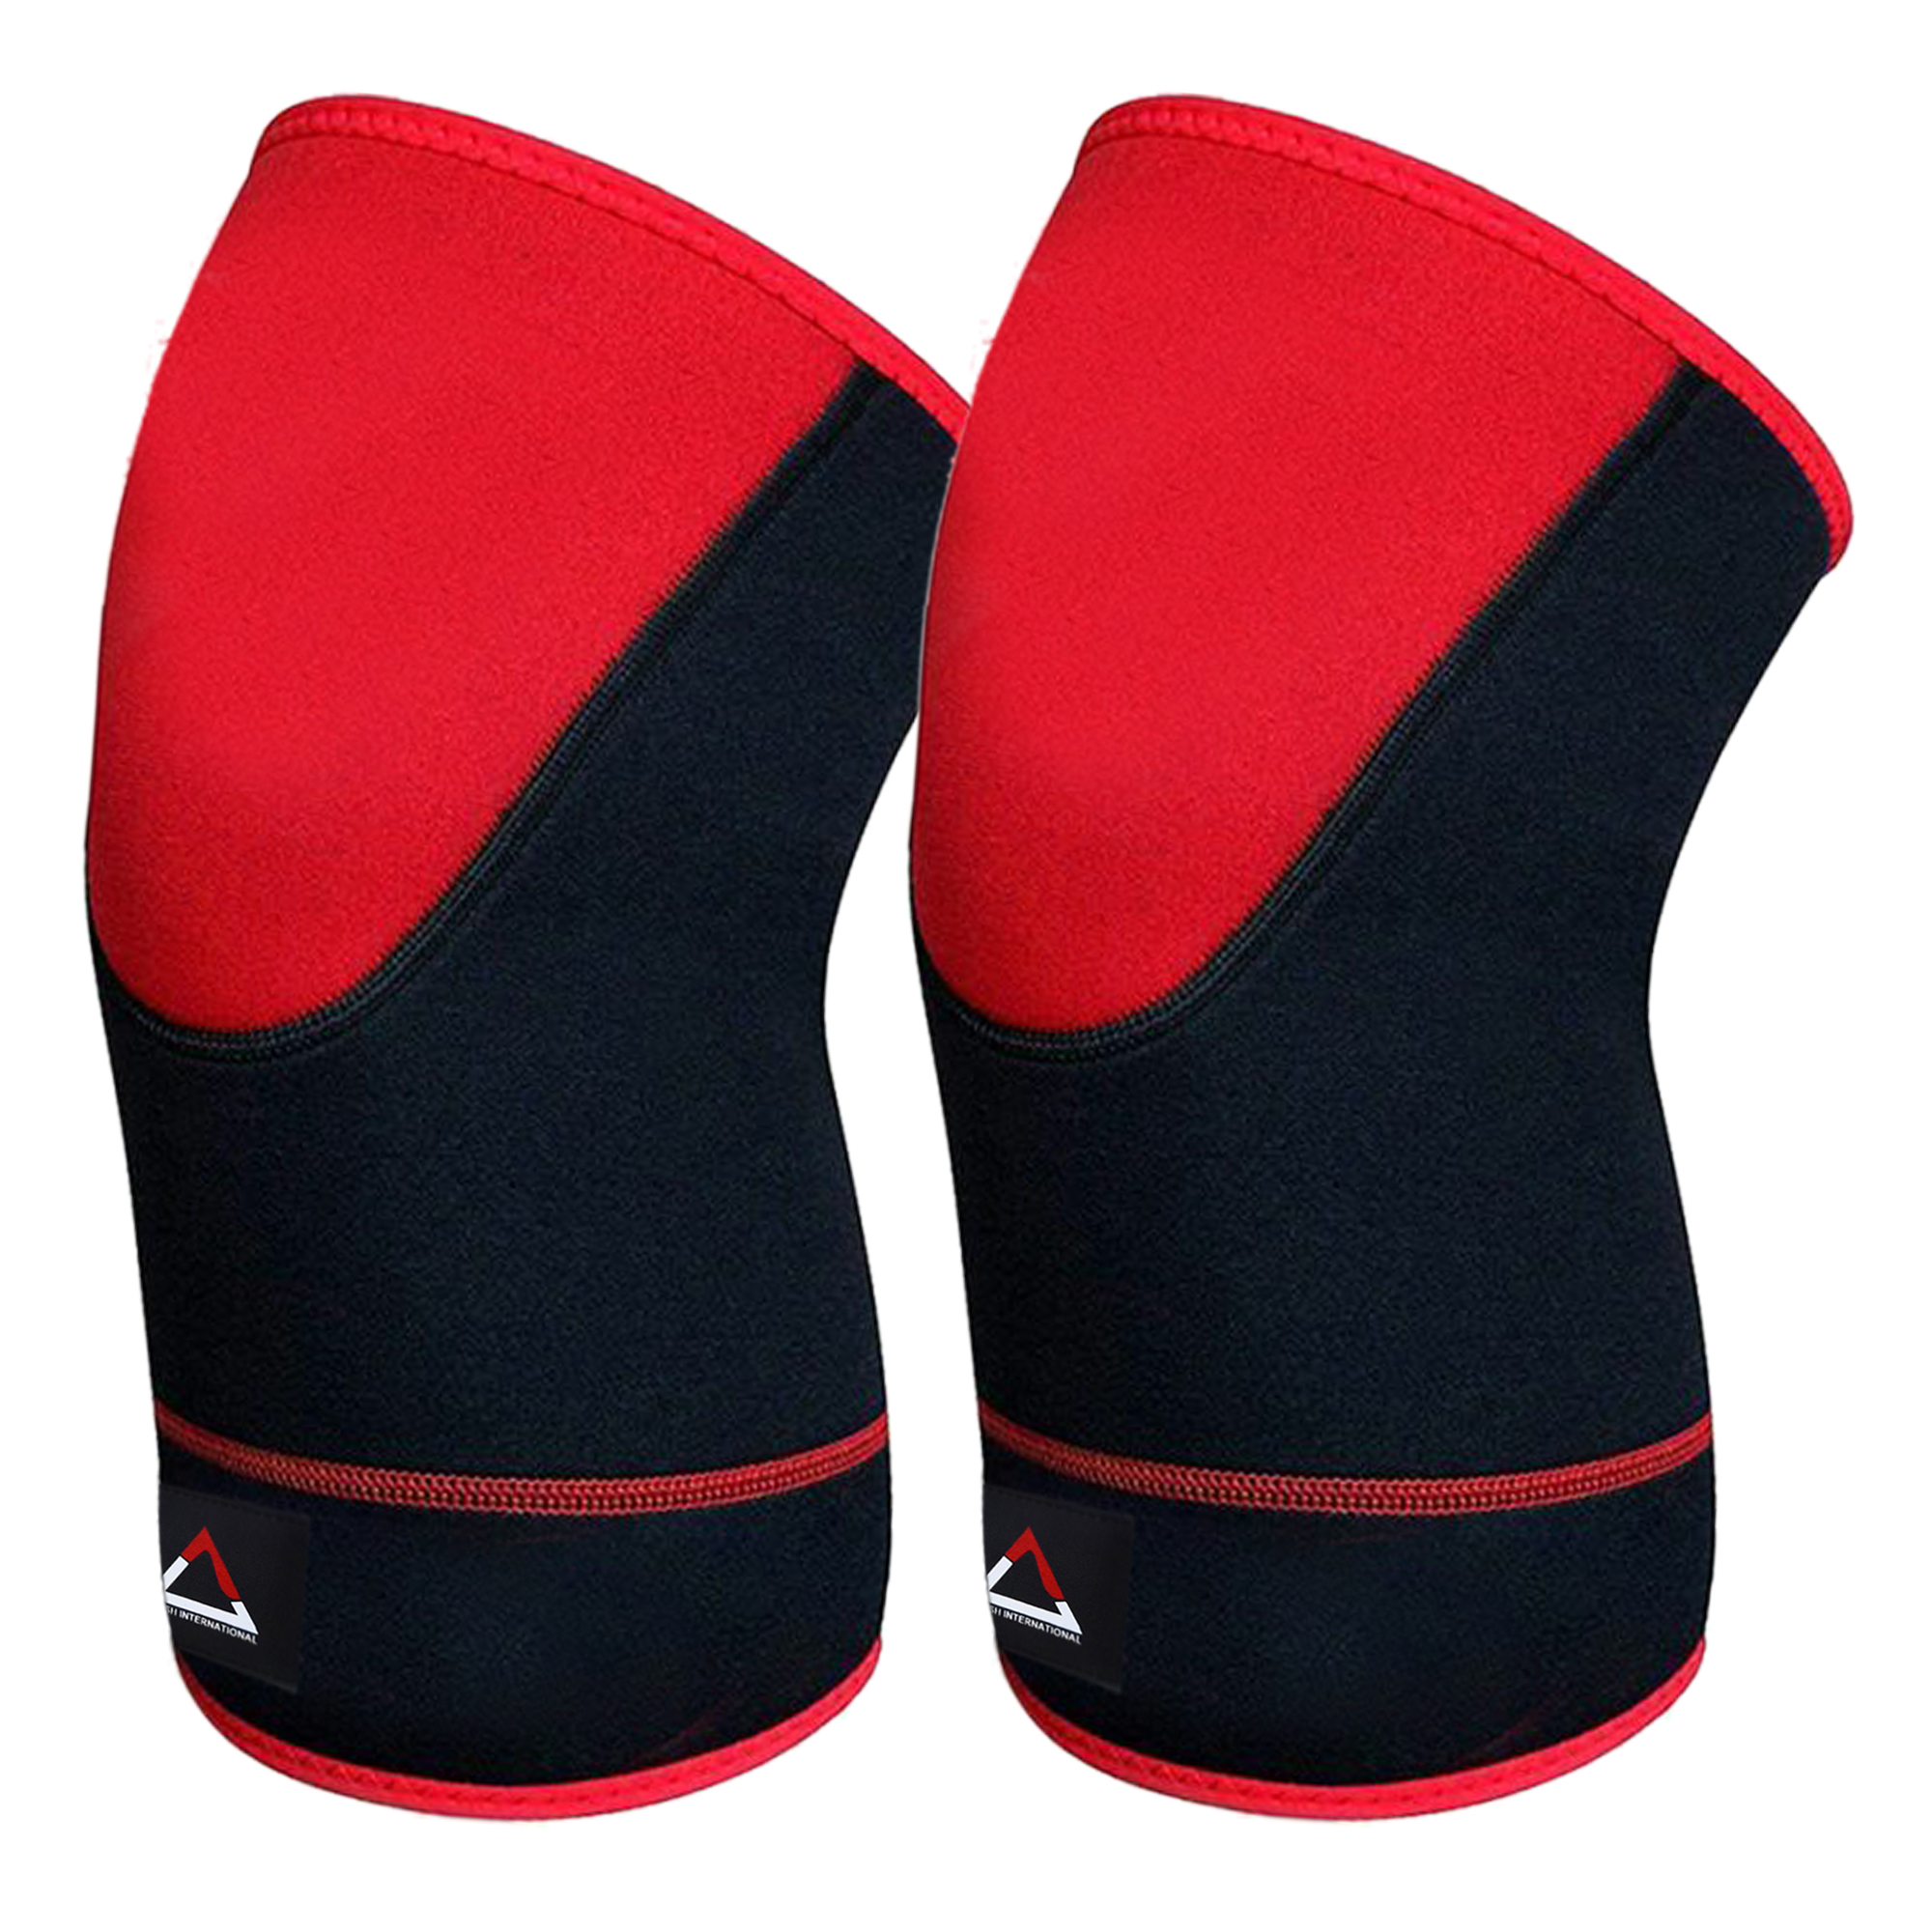 Black and Red Neoprene Knee Support